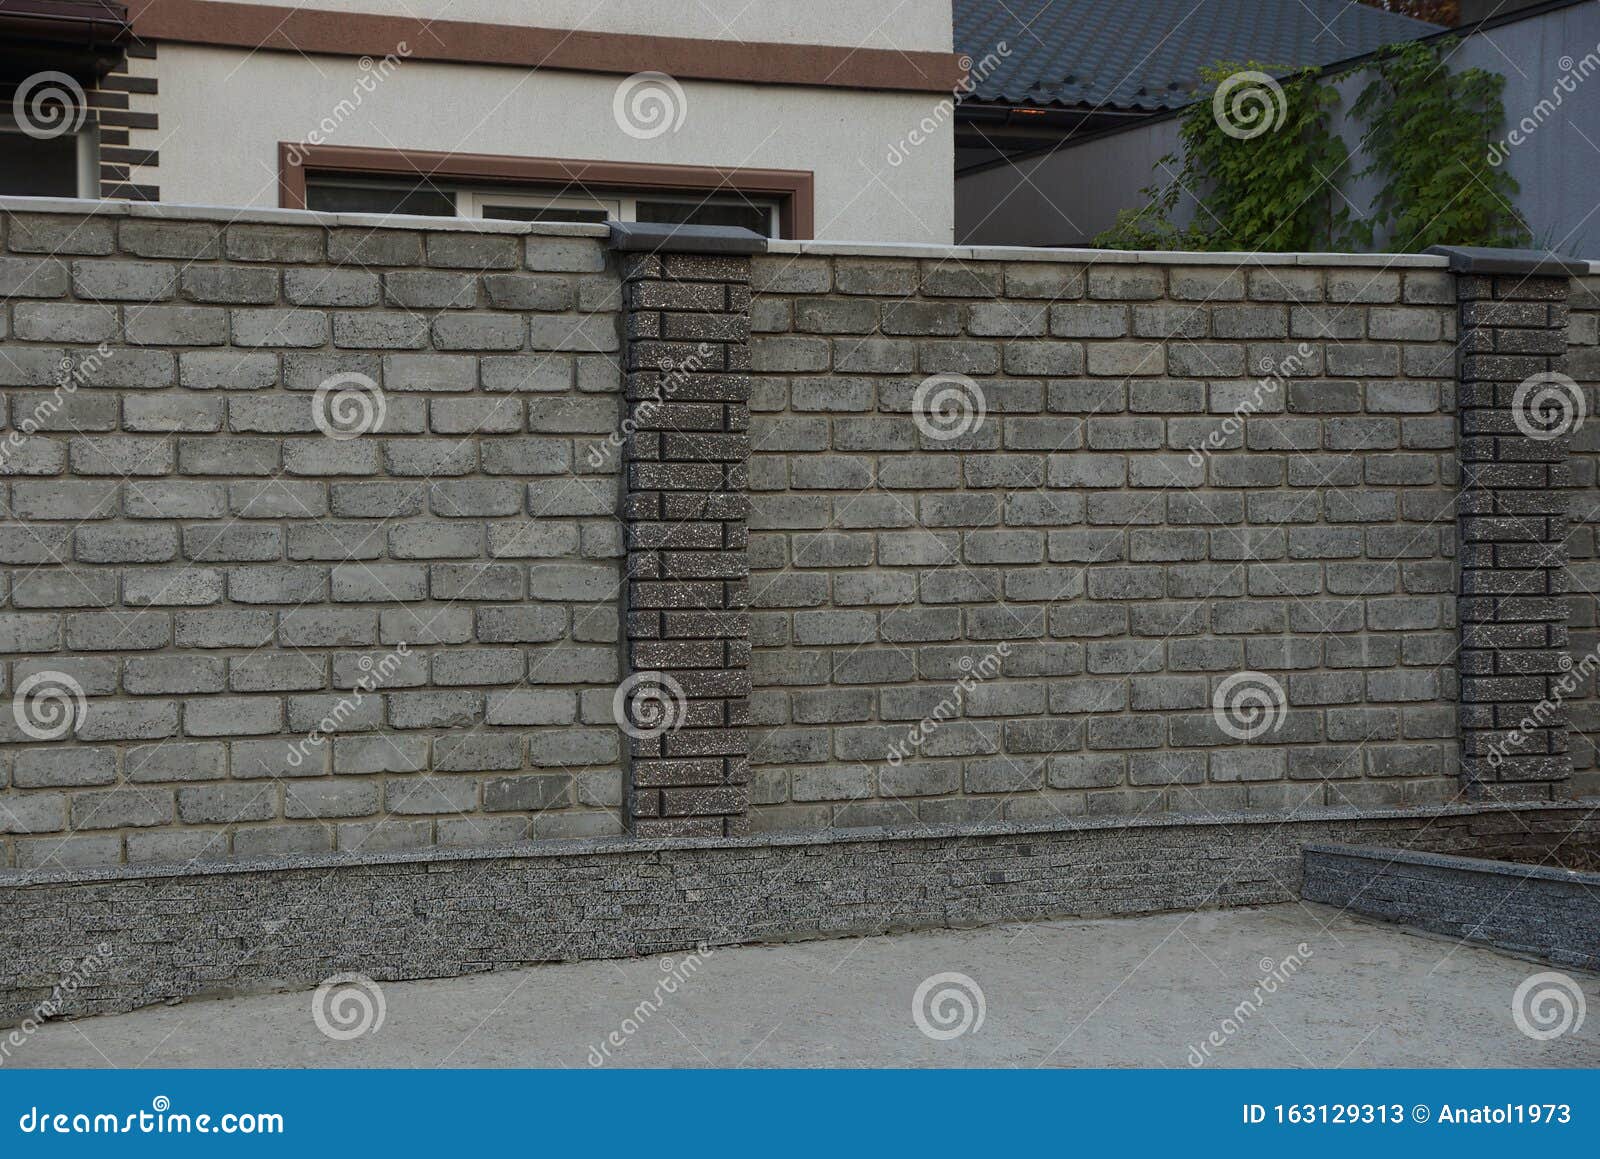 brick fence on a rural street